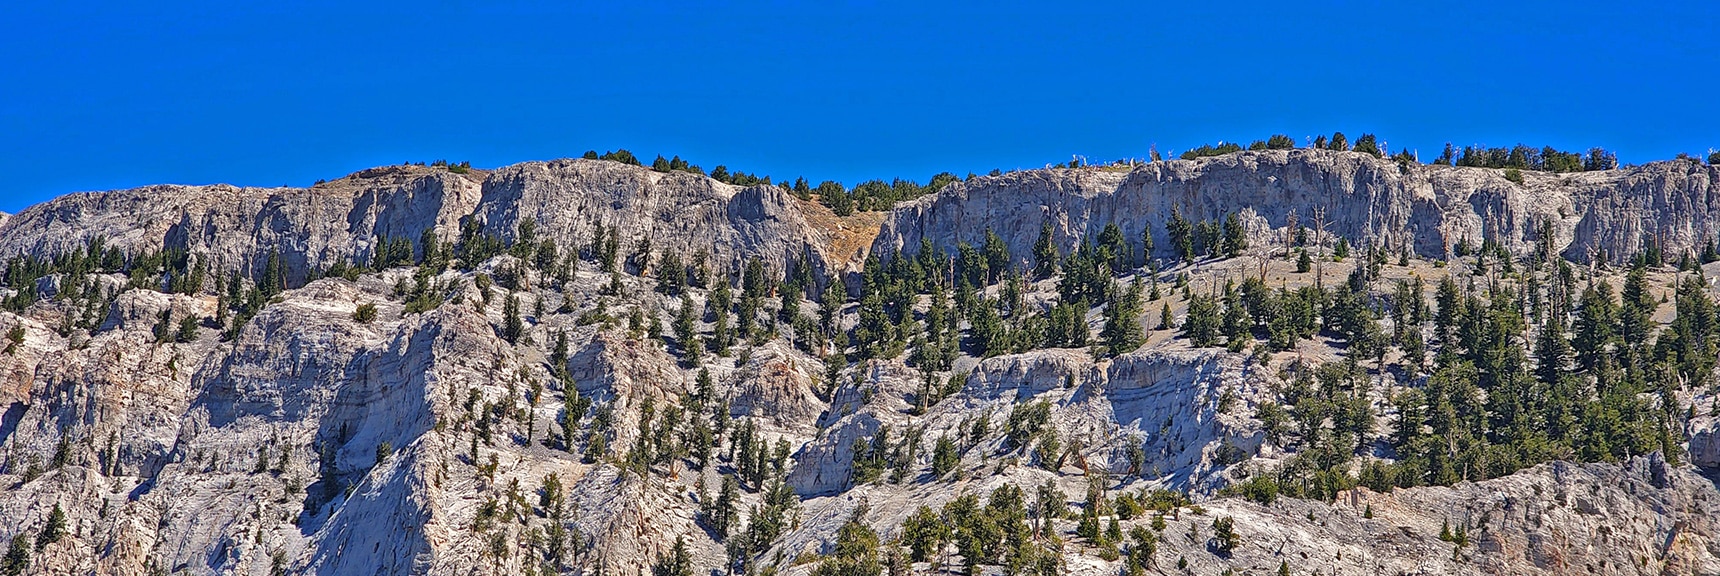 Closing in on Mummy Mountain. "V-Shaped" Cliff Summit Opening in Center | Mummy Mountain Grand Crossing | Lee Canyon to Deer Creek Road | Mt Charleston Wilderness | Spring Mountains, Nevada |